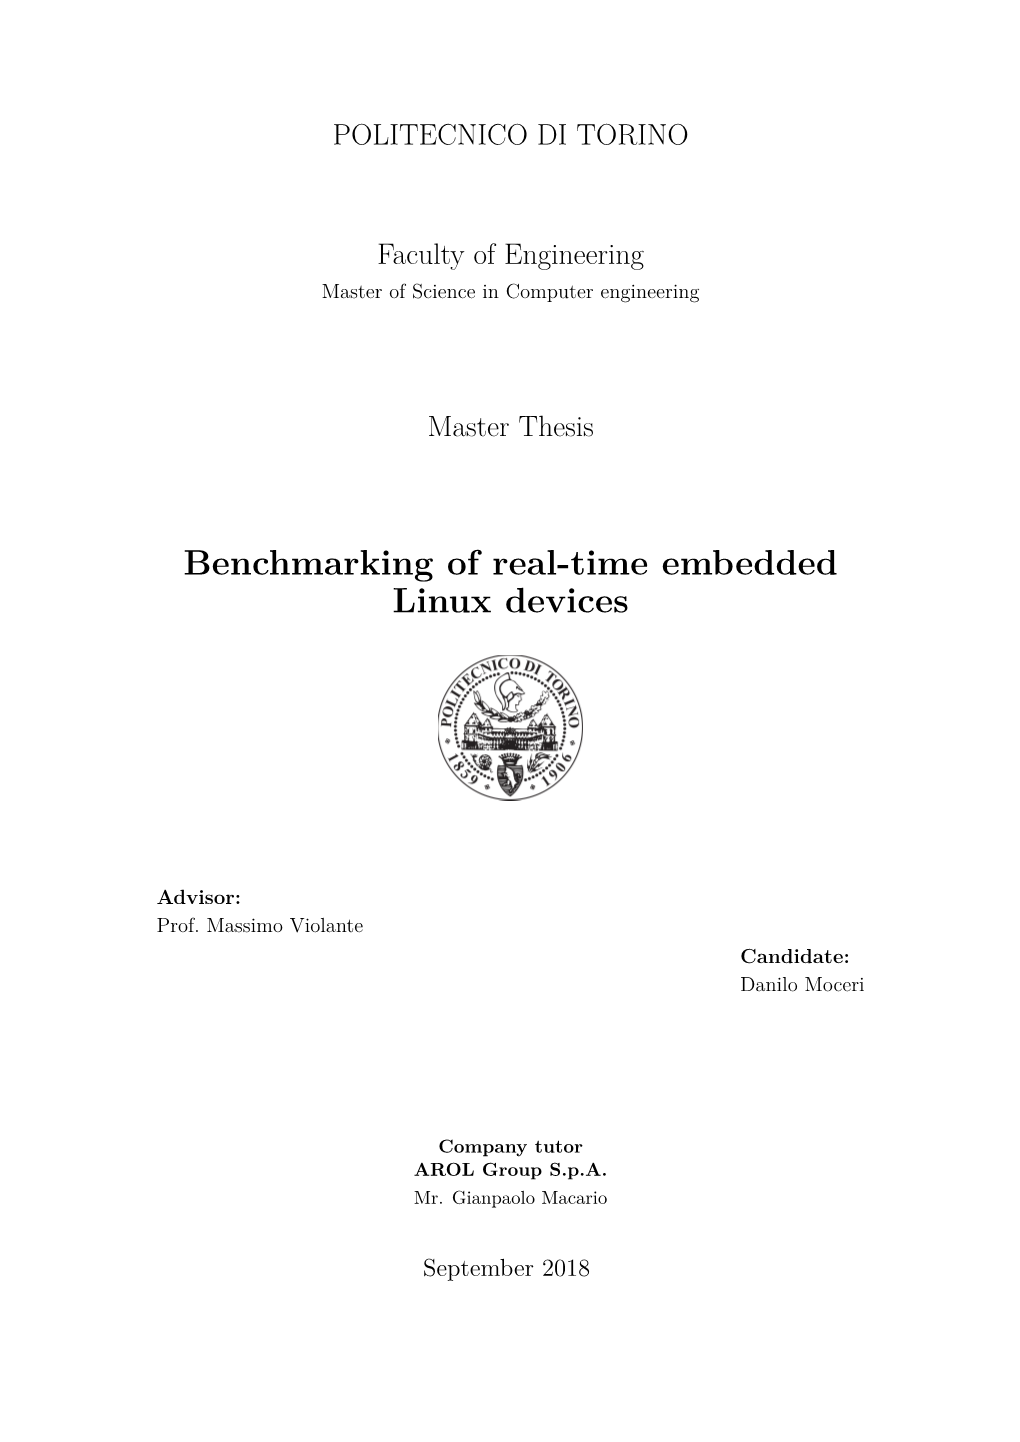 Benchmarking of Real-Time Embedded Linux Devices